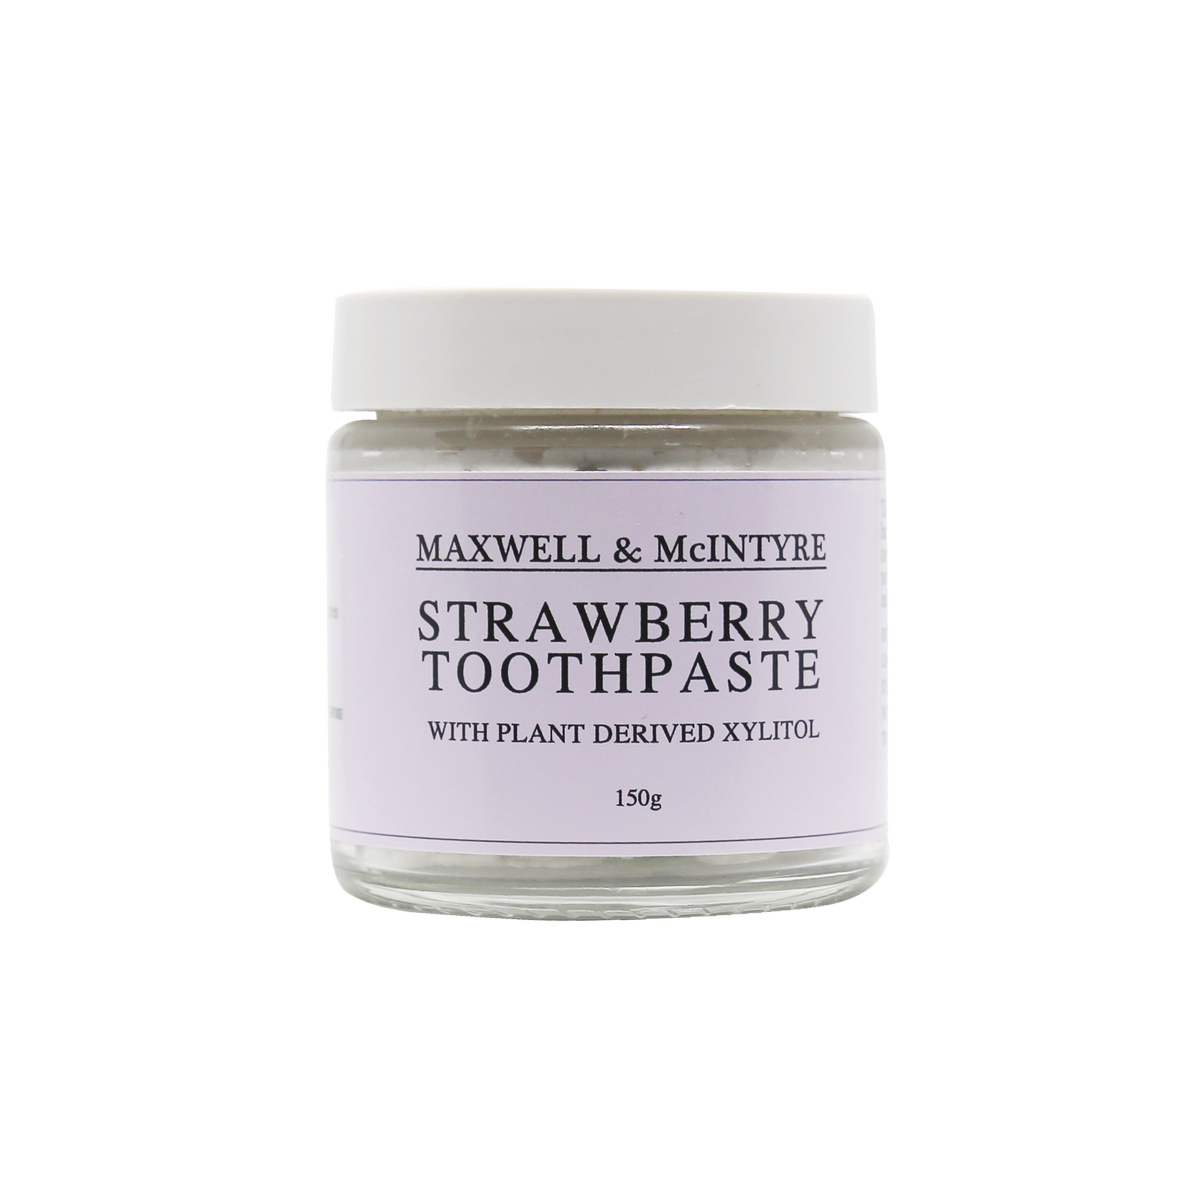 Maxwell & McIntyre Coconut Oil Toothpaste - Strawberry, $16 from ohnatural.co.nz